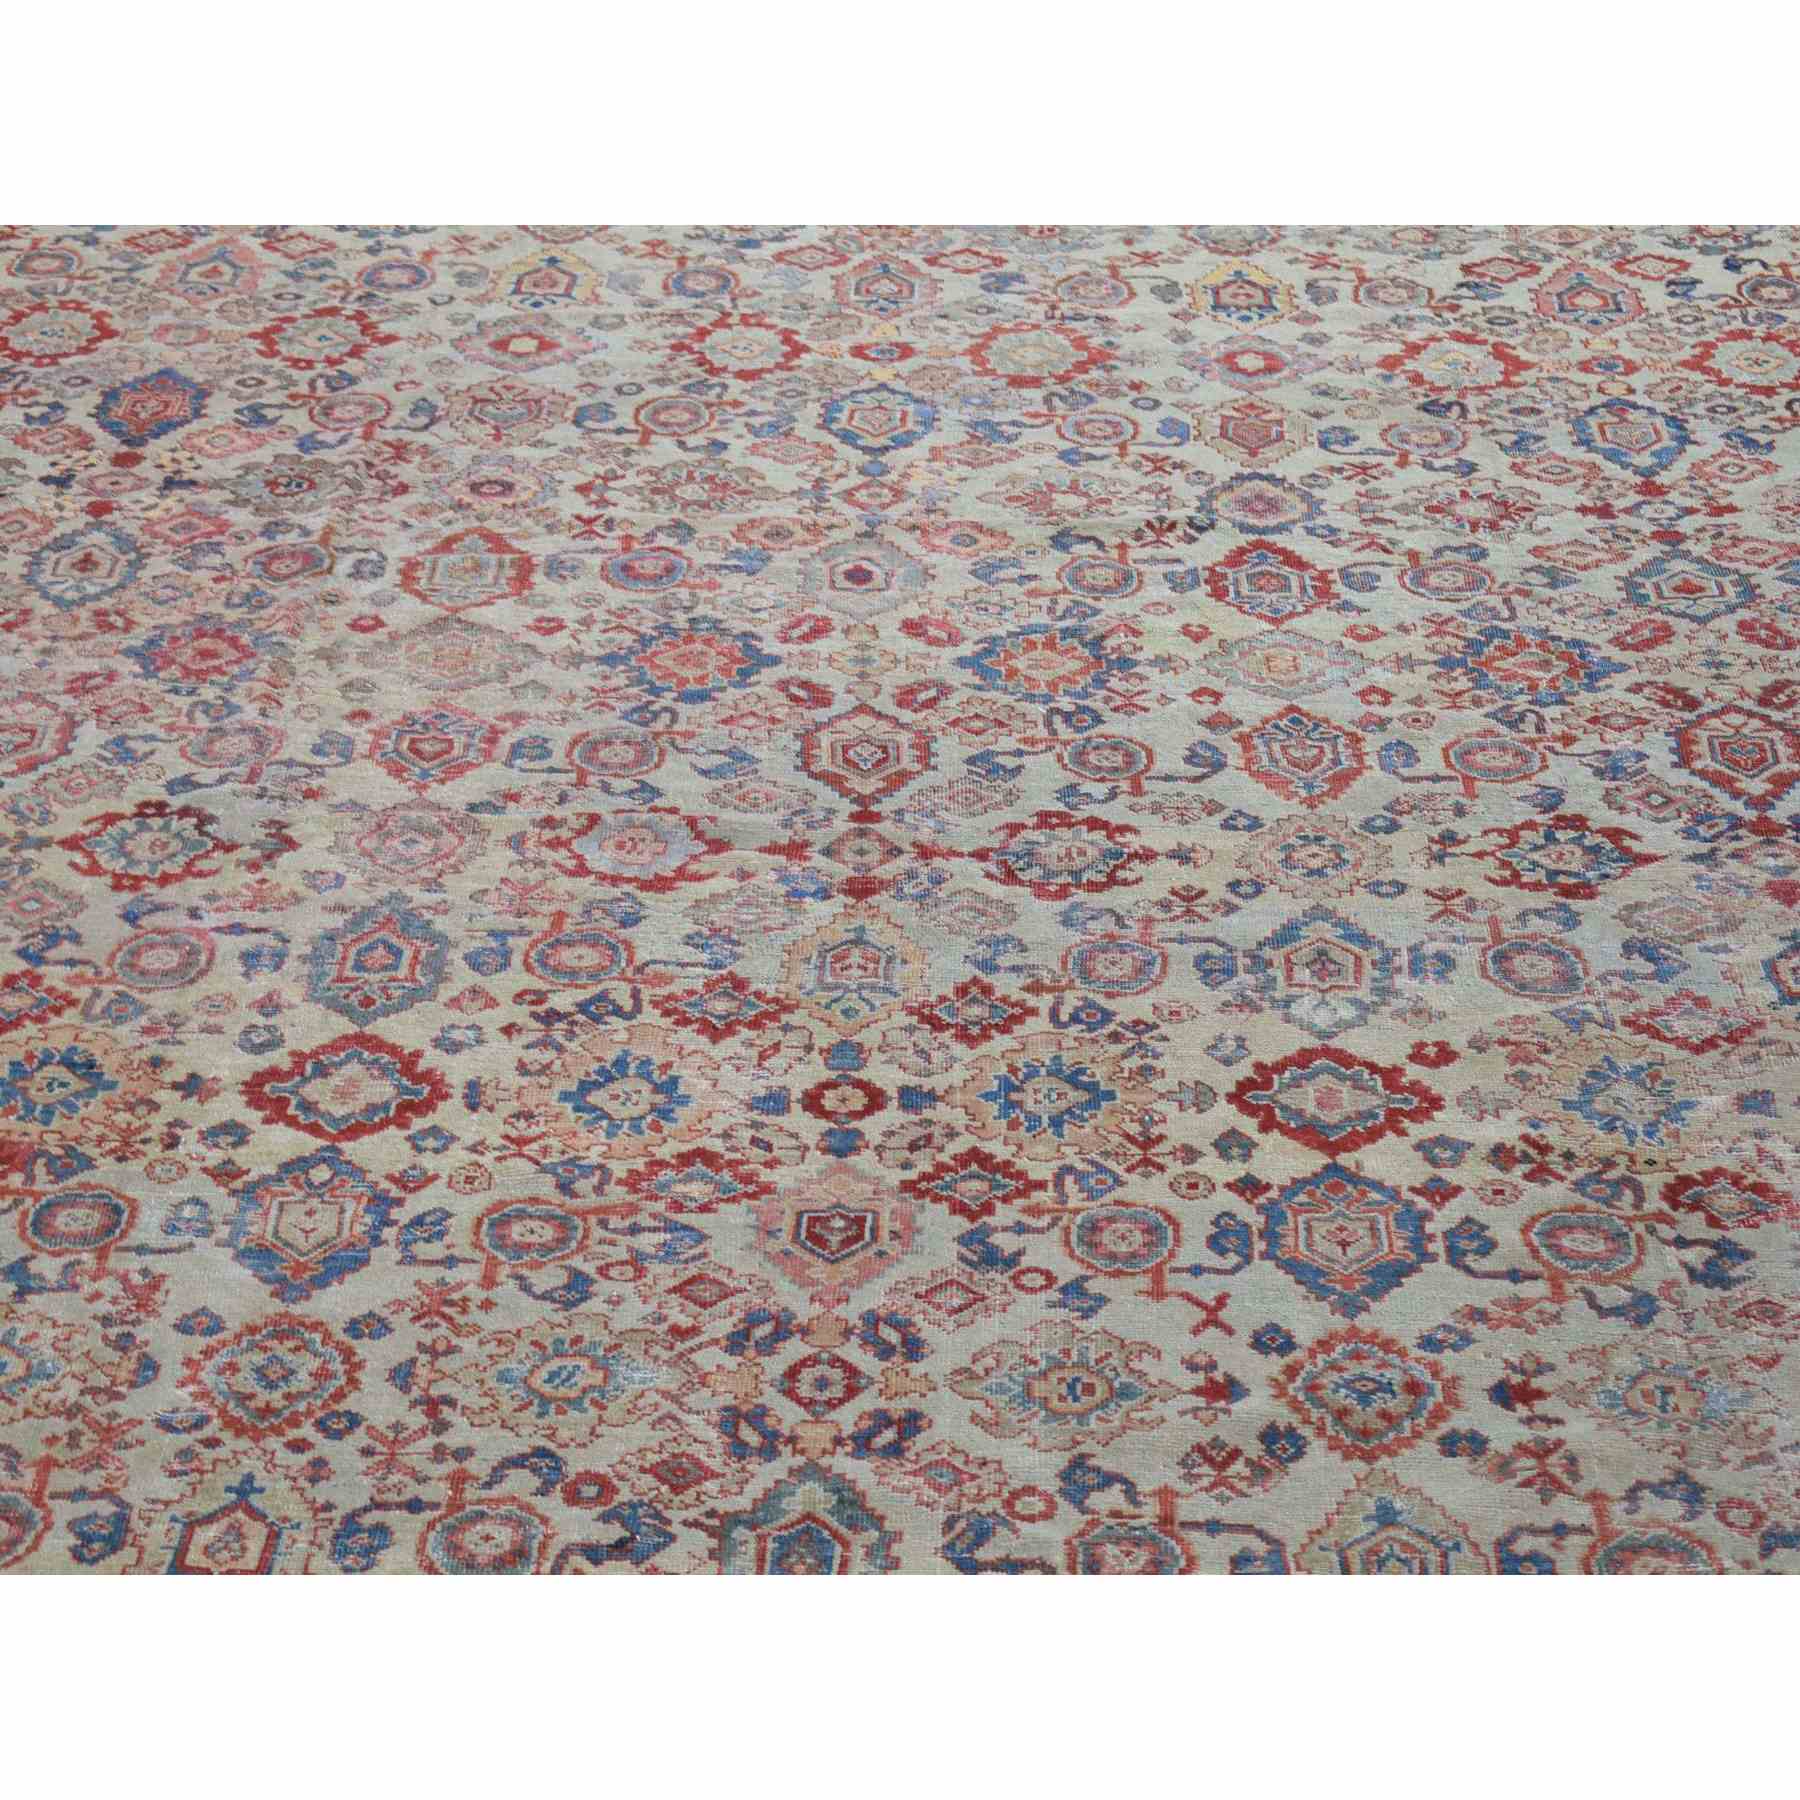 Antique-Hand-Knotted-Rug-400580